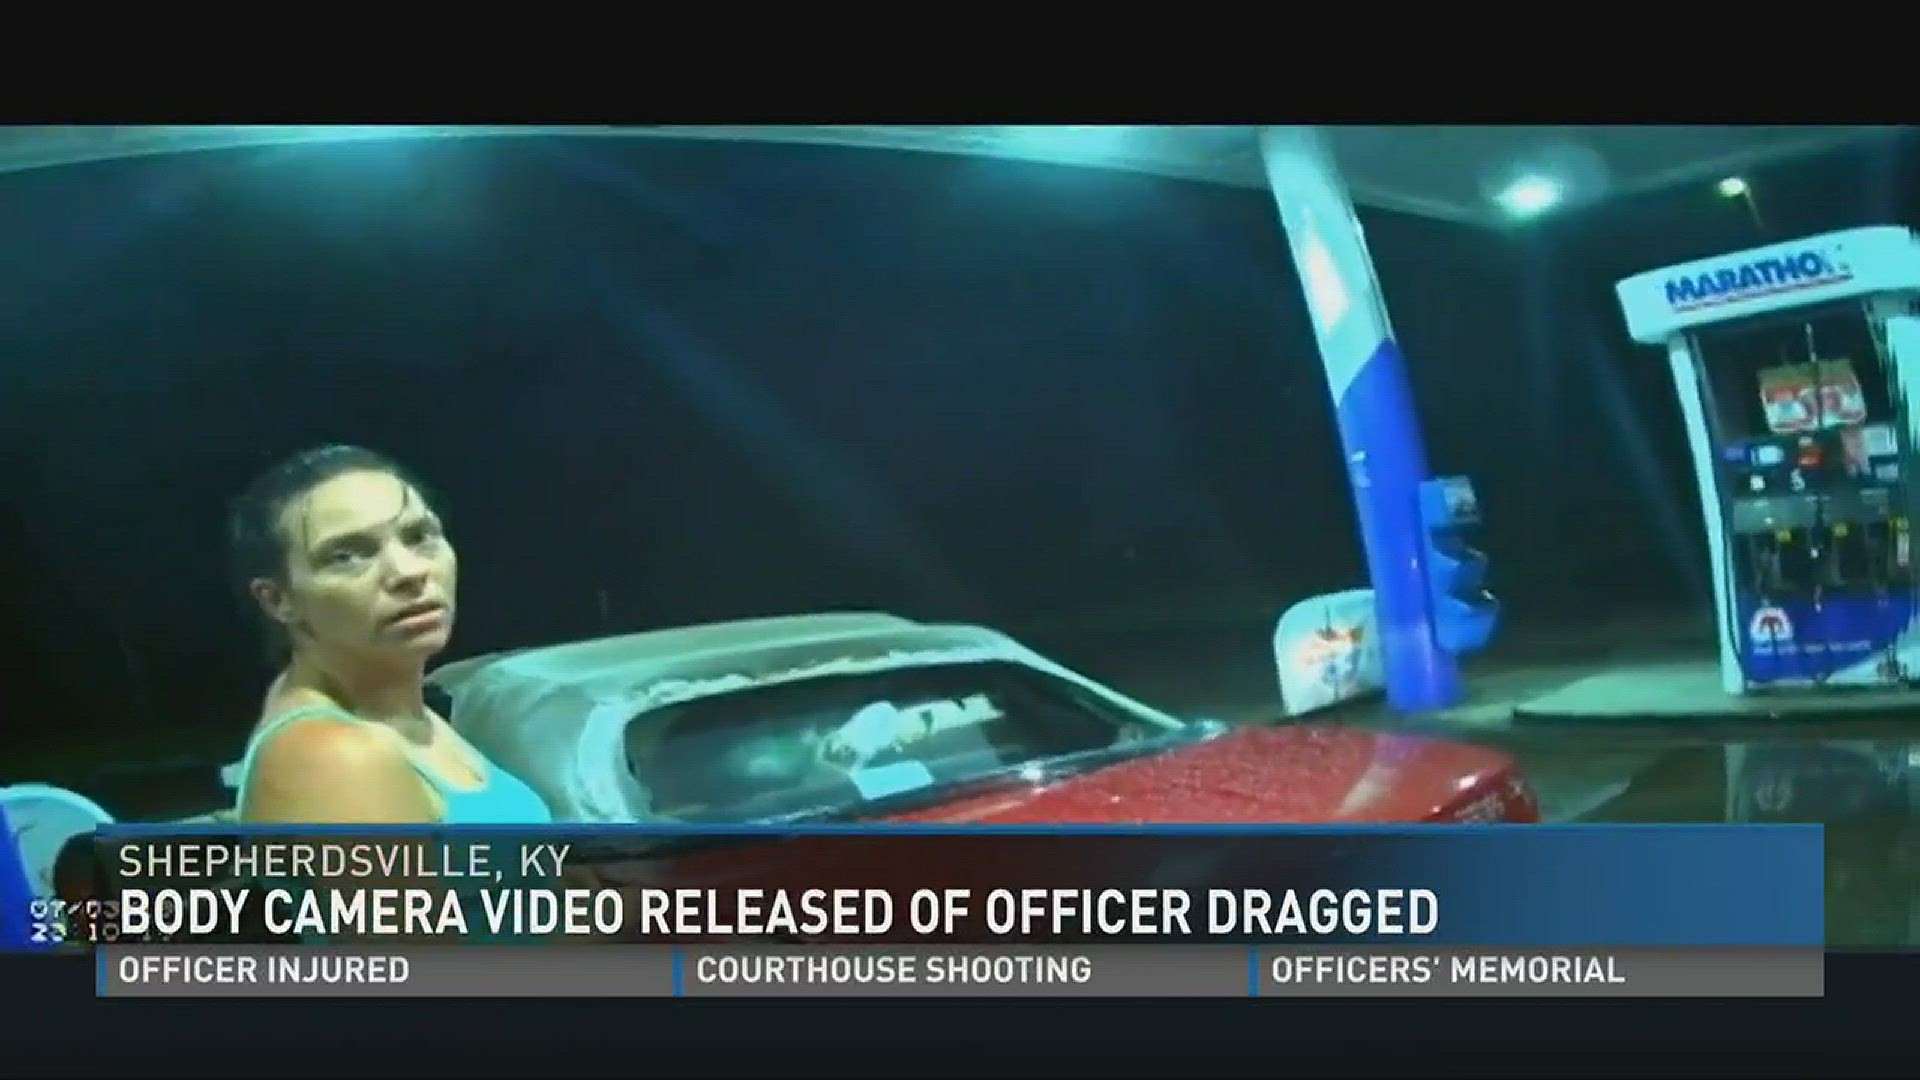 Body camera video released of officer dragged